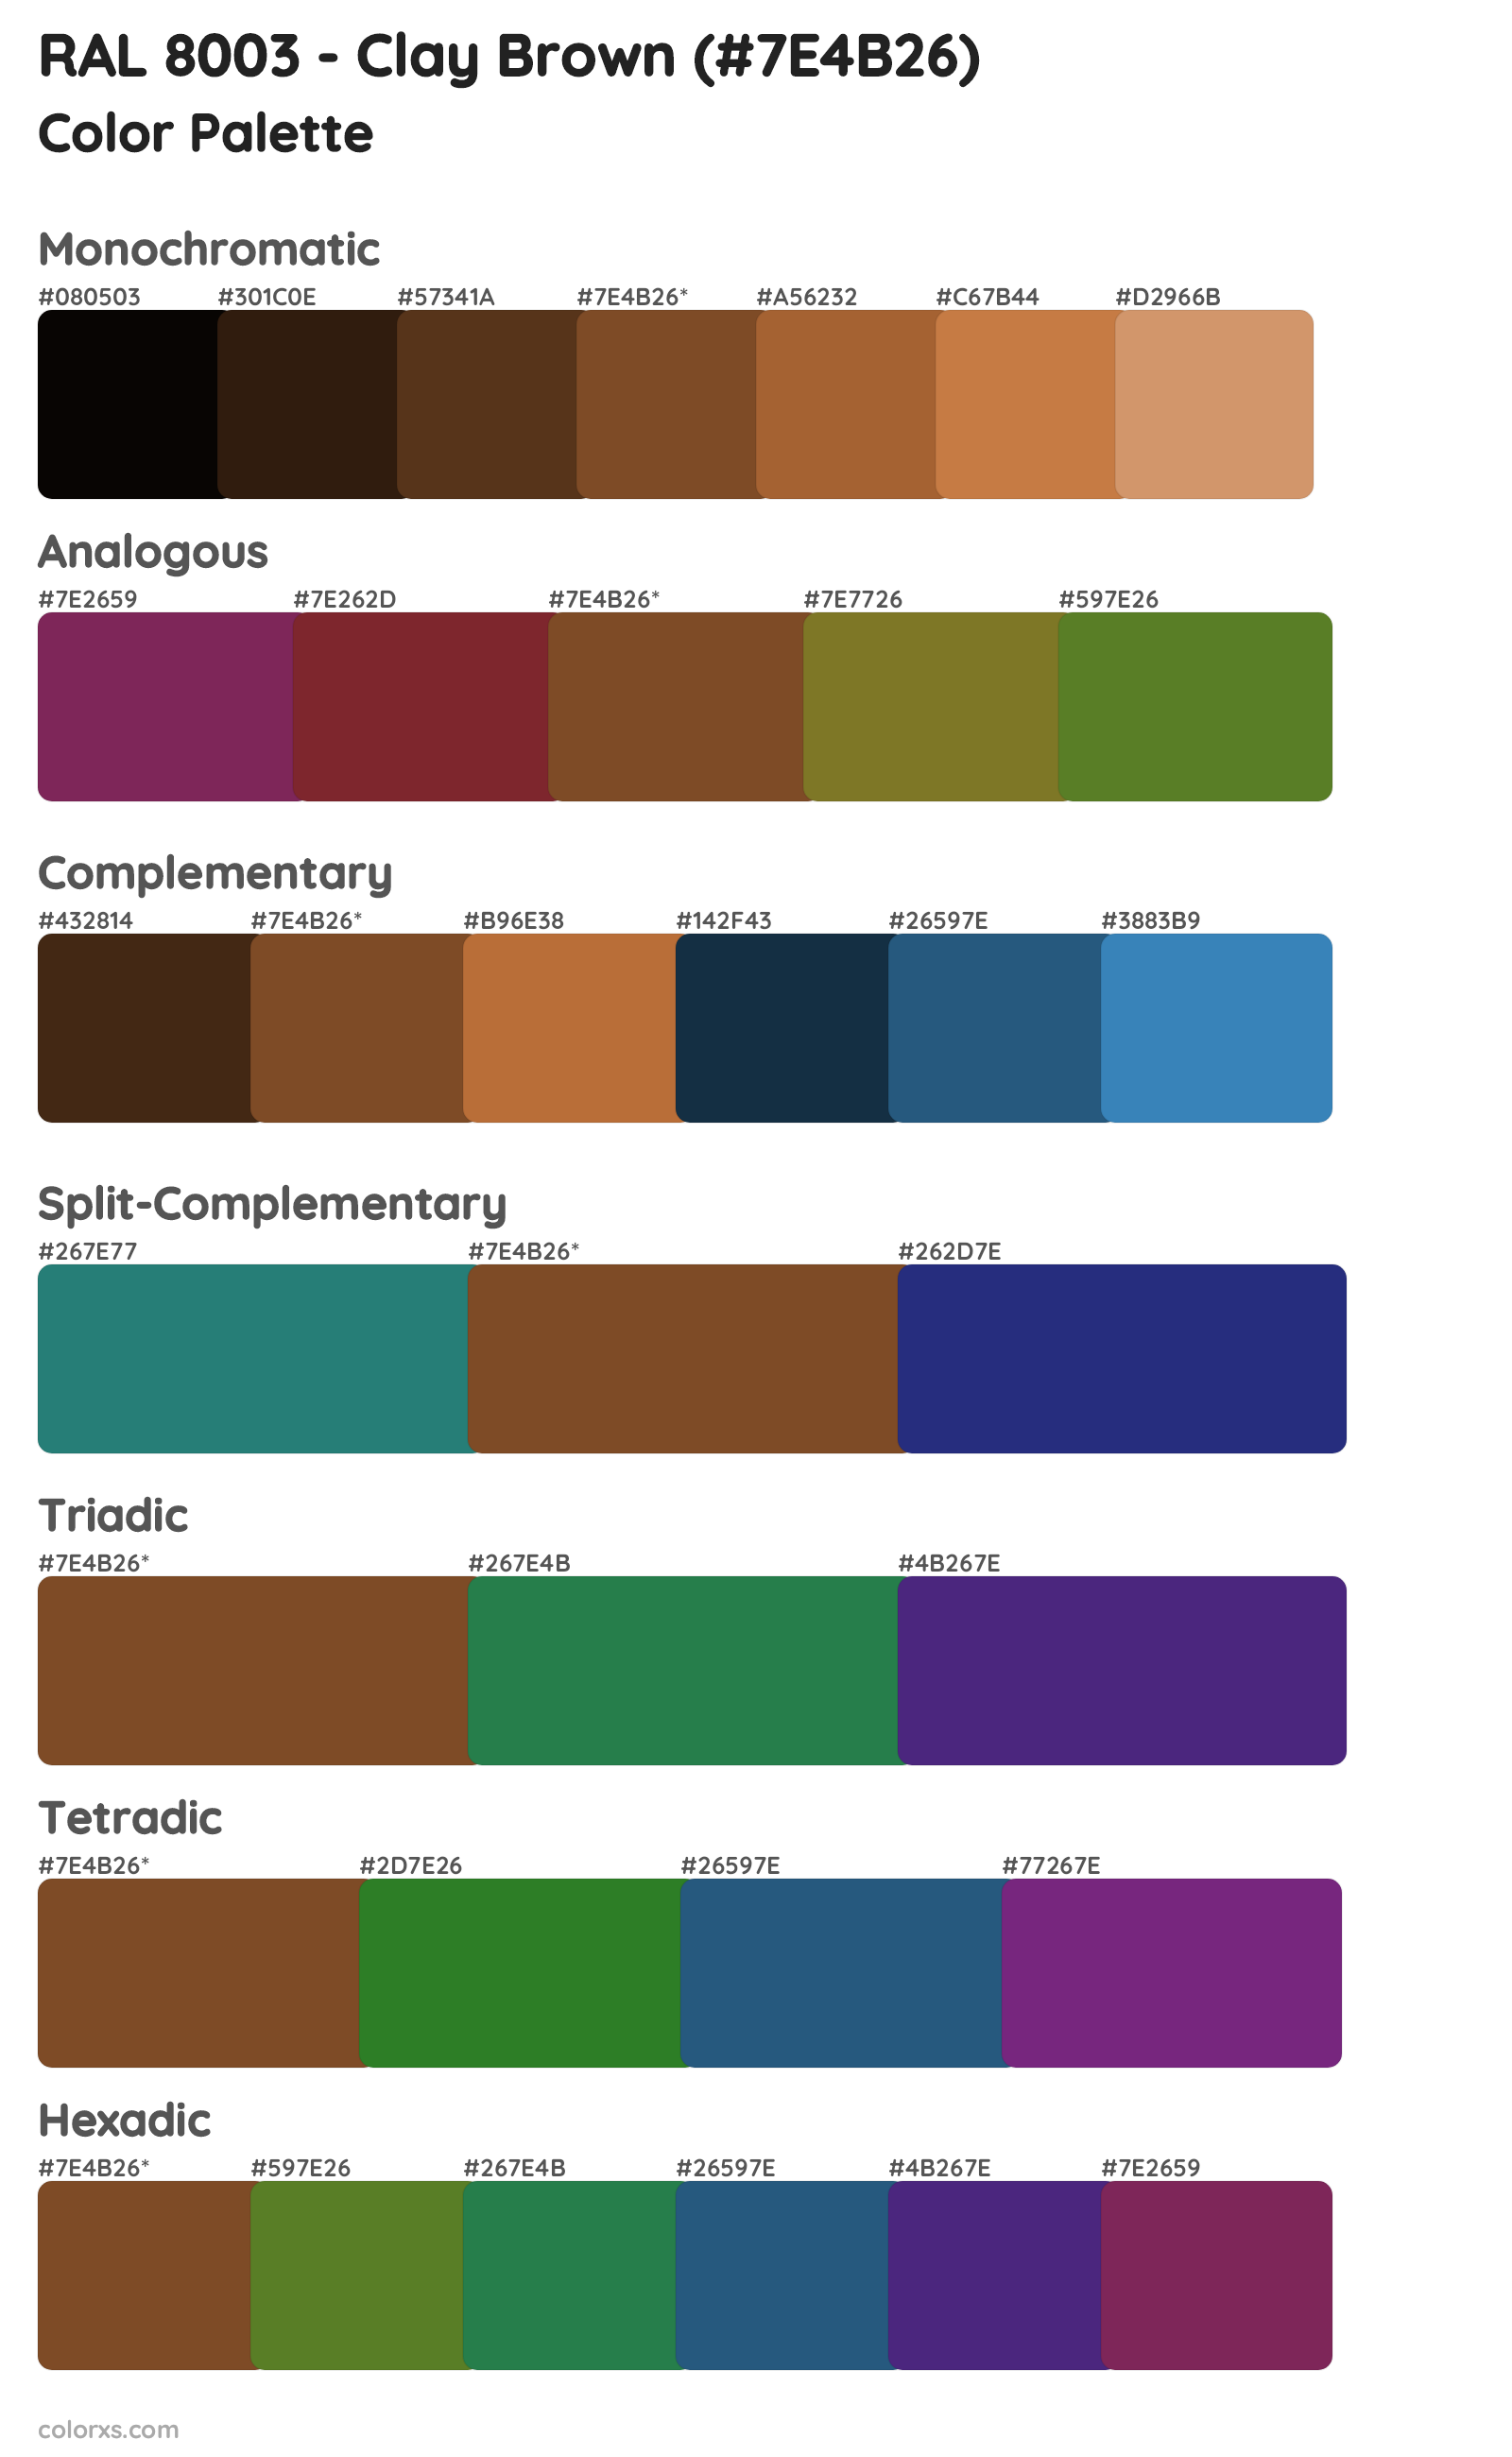 RAL 8003 - Clay Brown Color Scheme Palettes